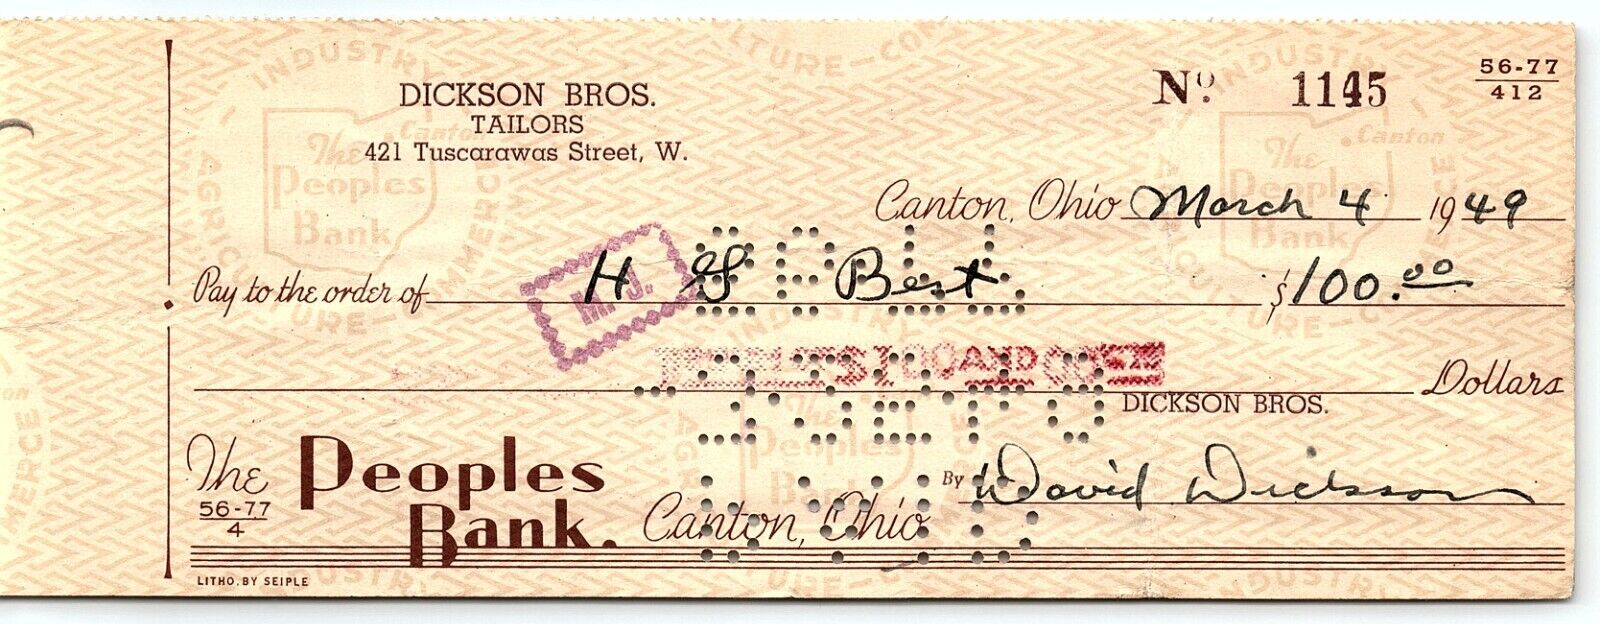 1949 CANTON OHIO DICKSON BROS. TAILORS THE PEOPLES BANK CHECK Z1618